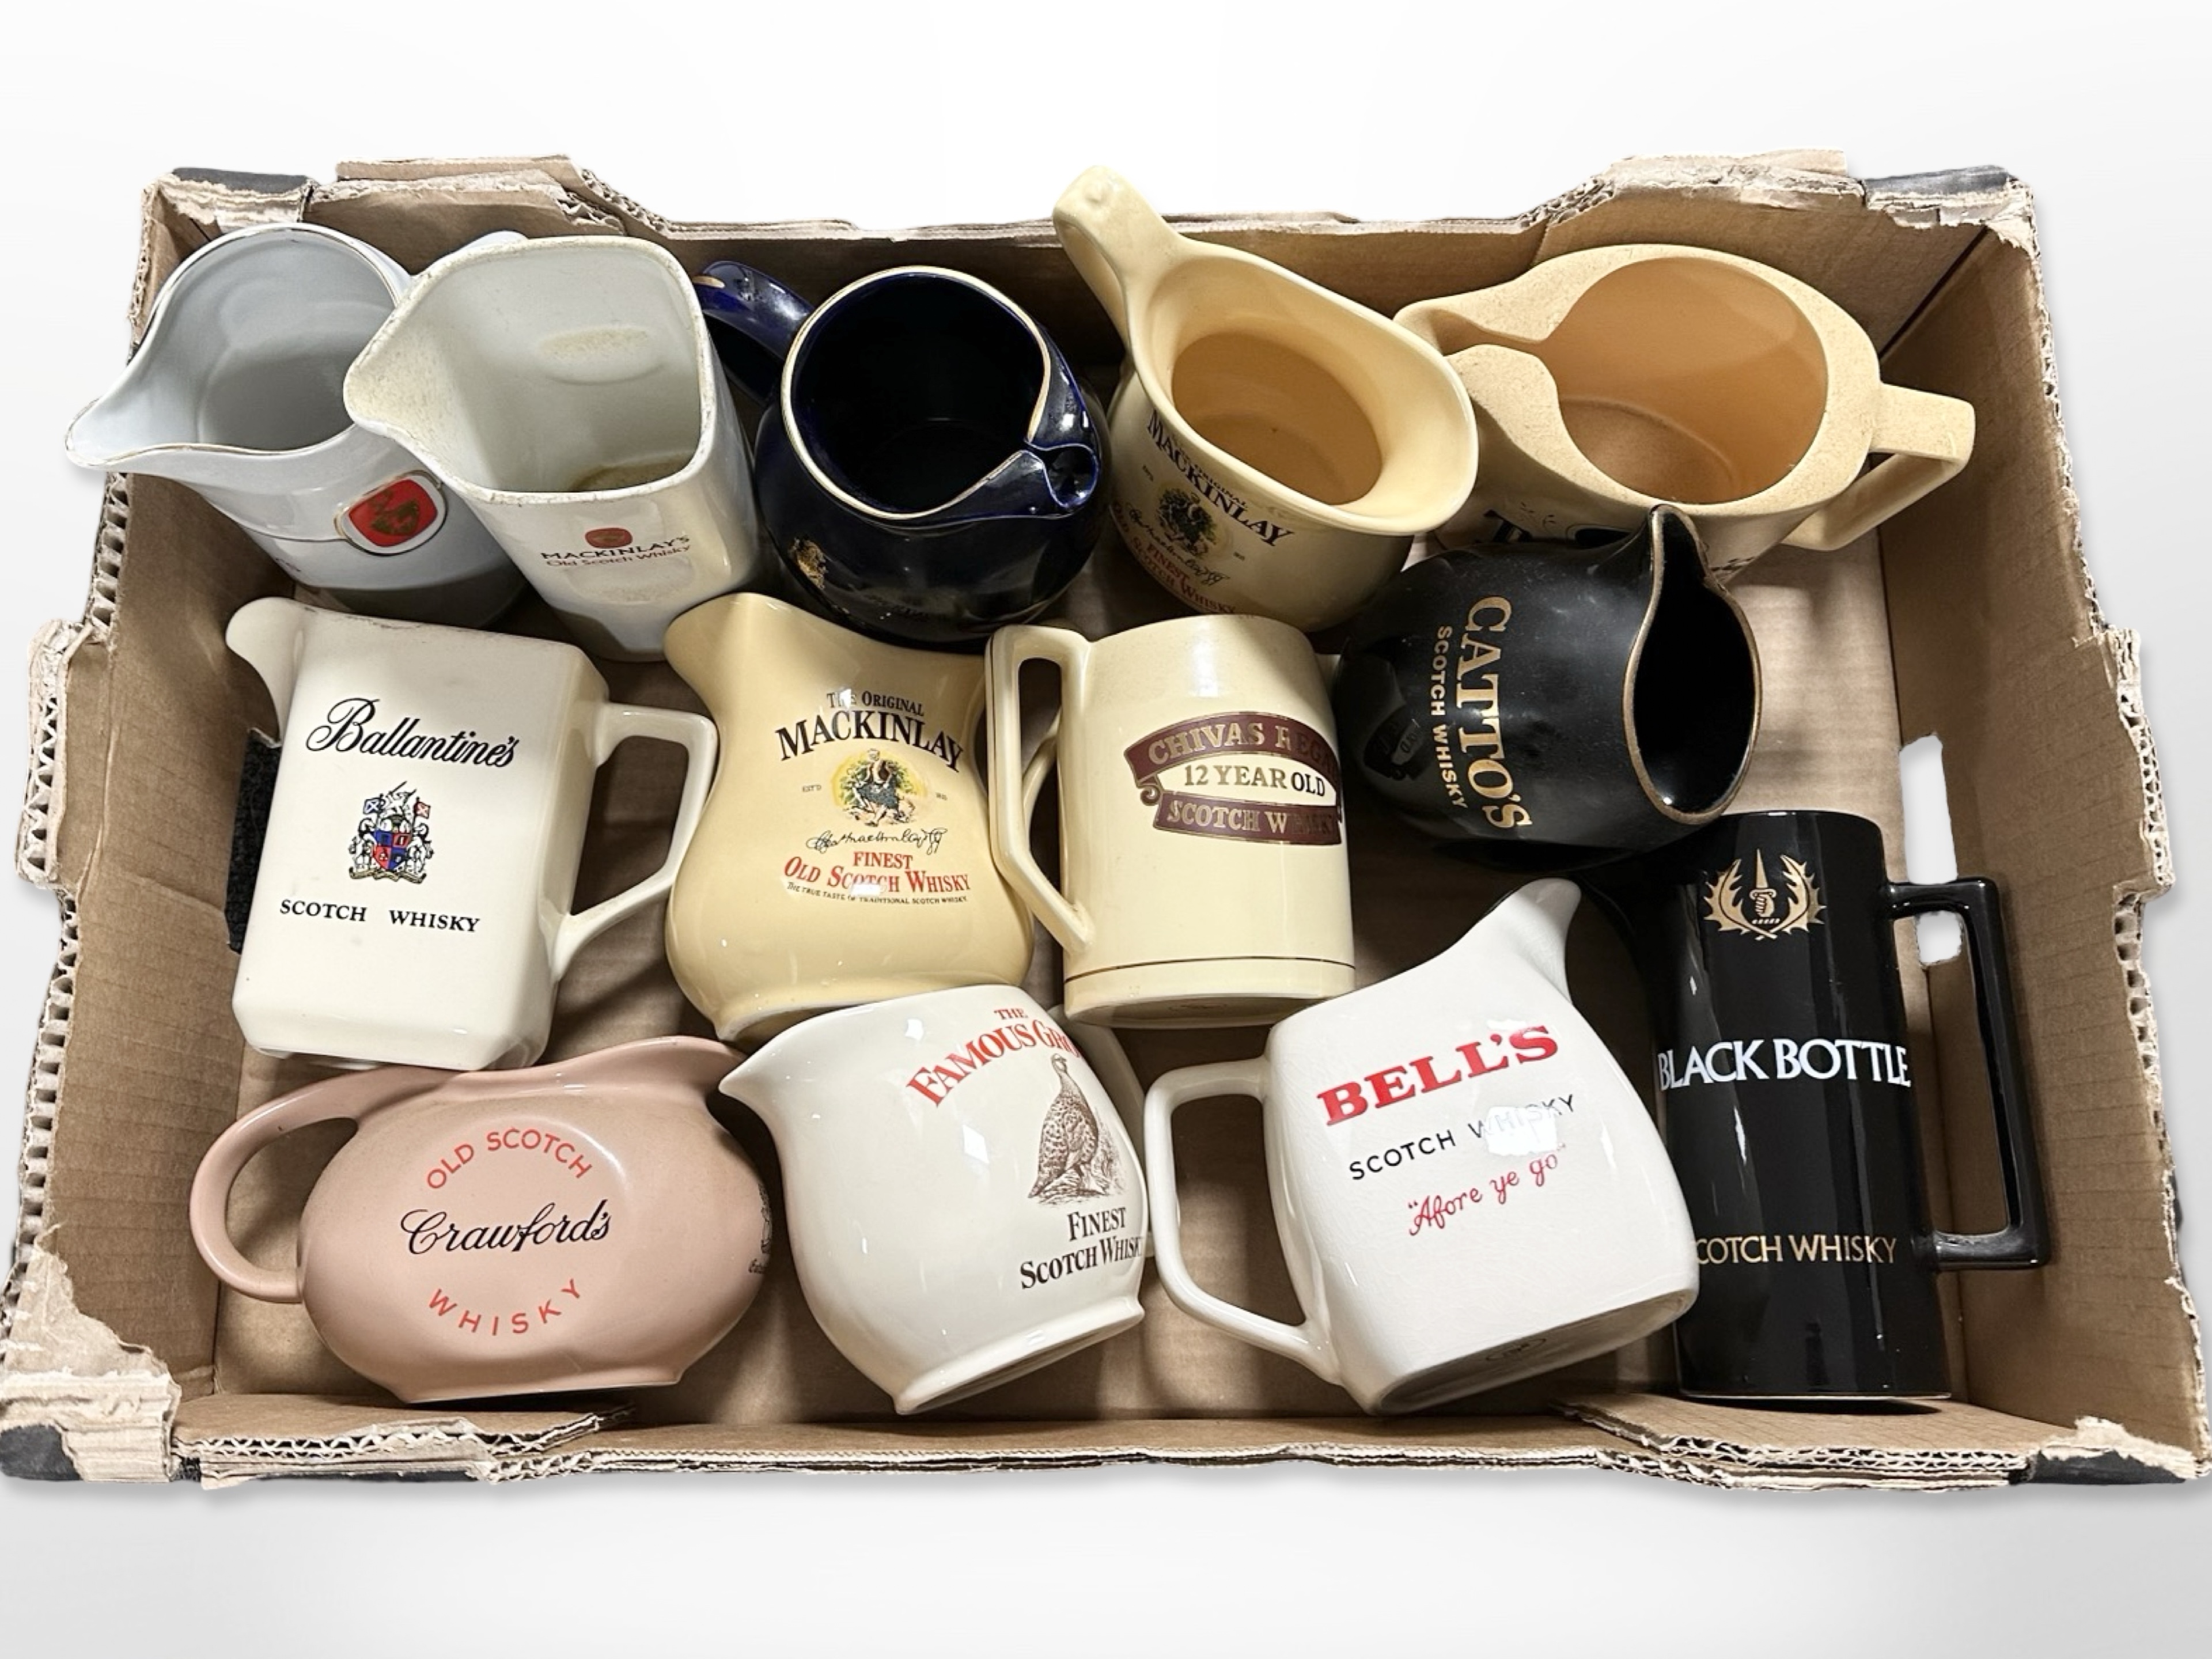 A collection of ceramic whisky jugs bearing various advertising.